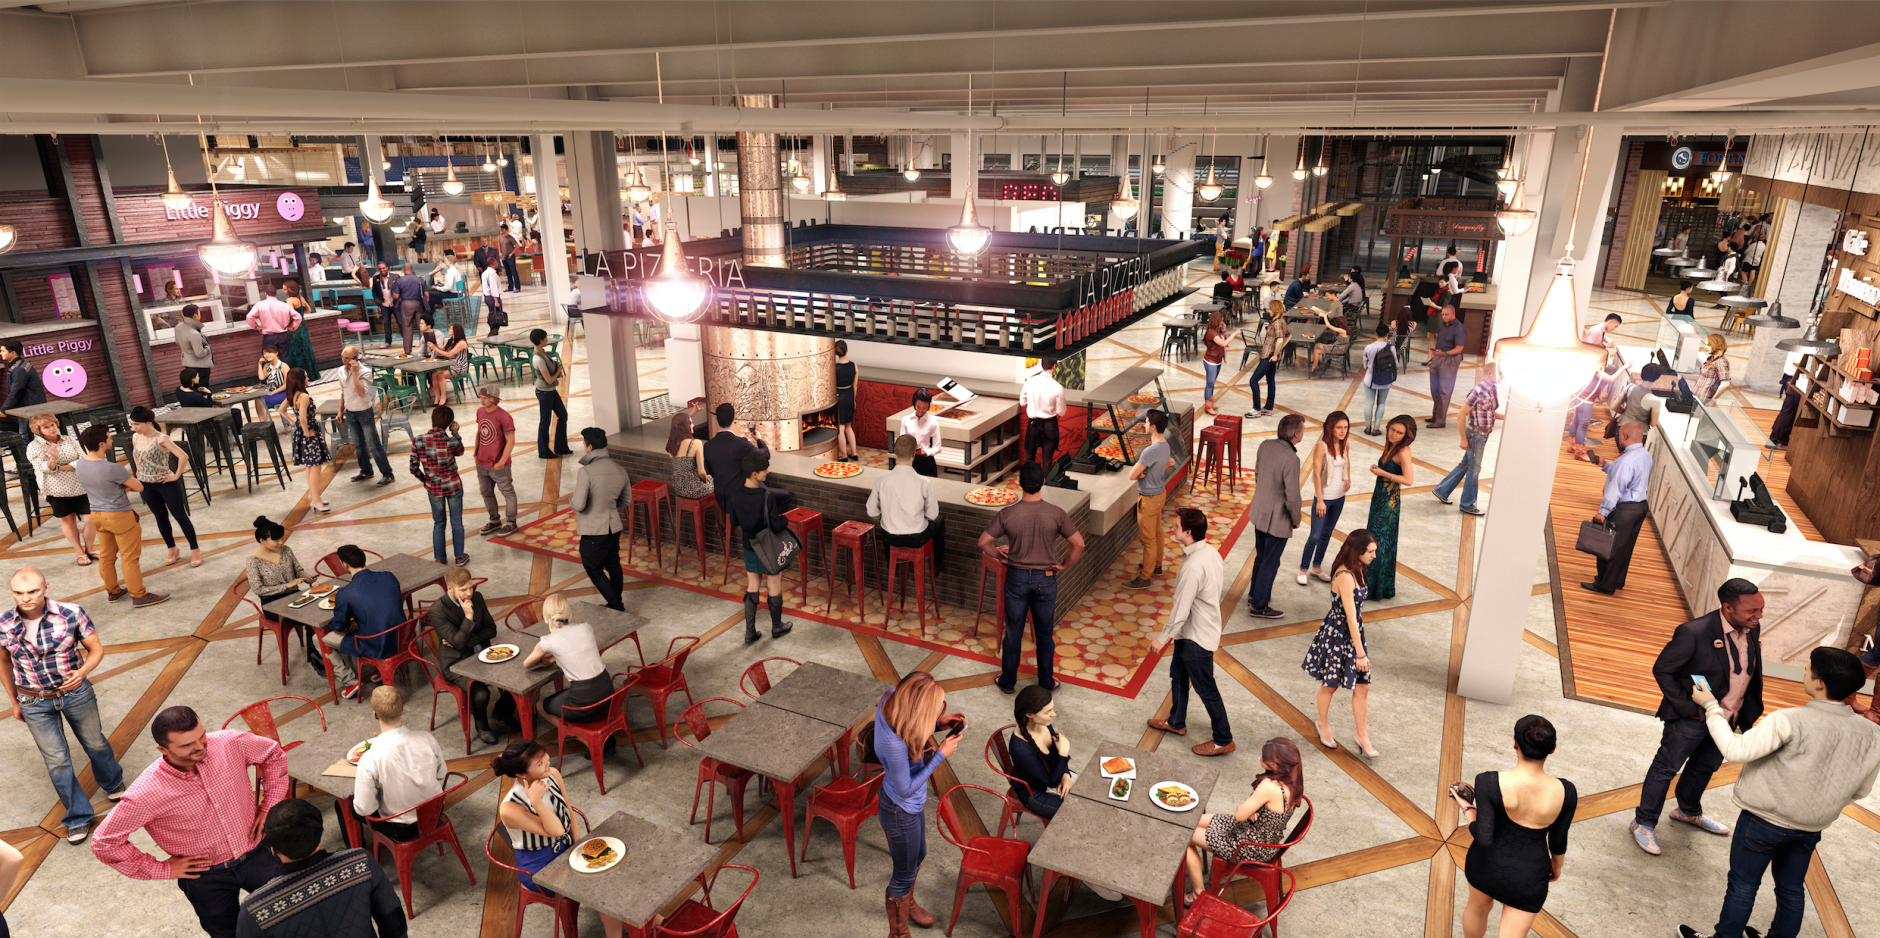 A rendering of the dining hall at the Ballston Quarter project. (Courtesy of Forest City Washington)